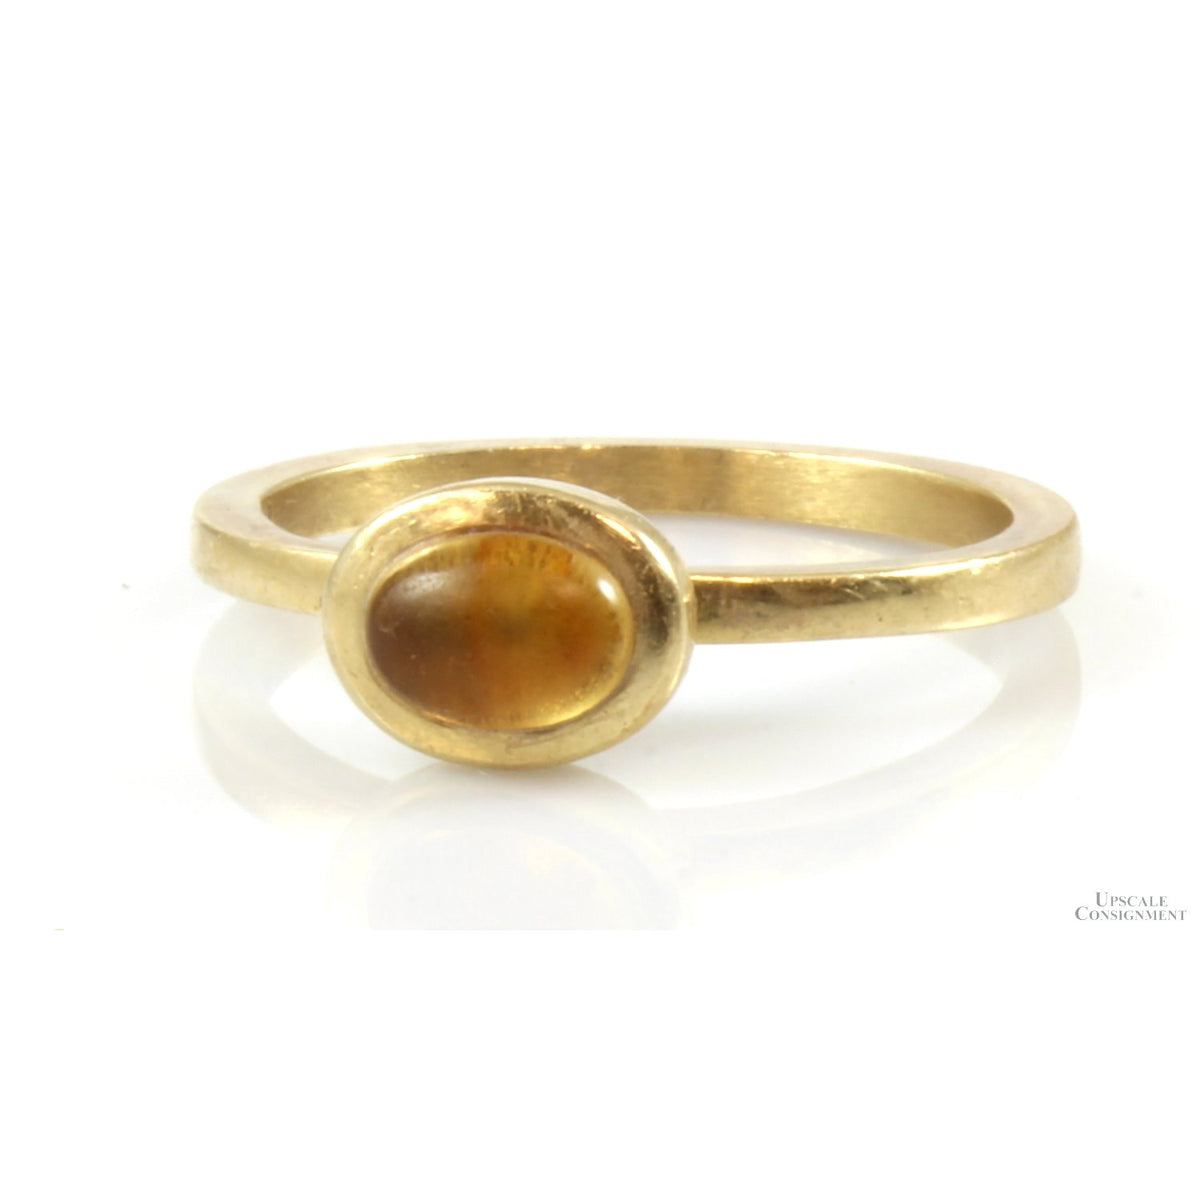 Handcrafted .66ct Oval Citrine Gem 14K Yellow Gold Ring